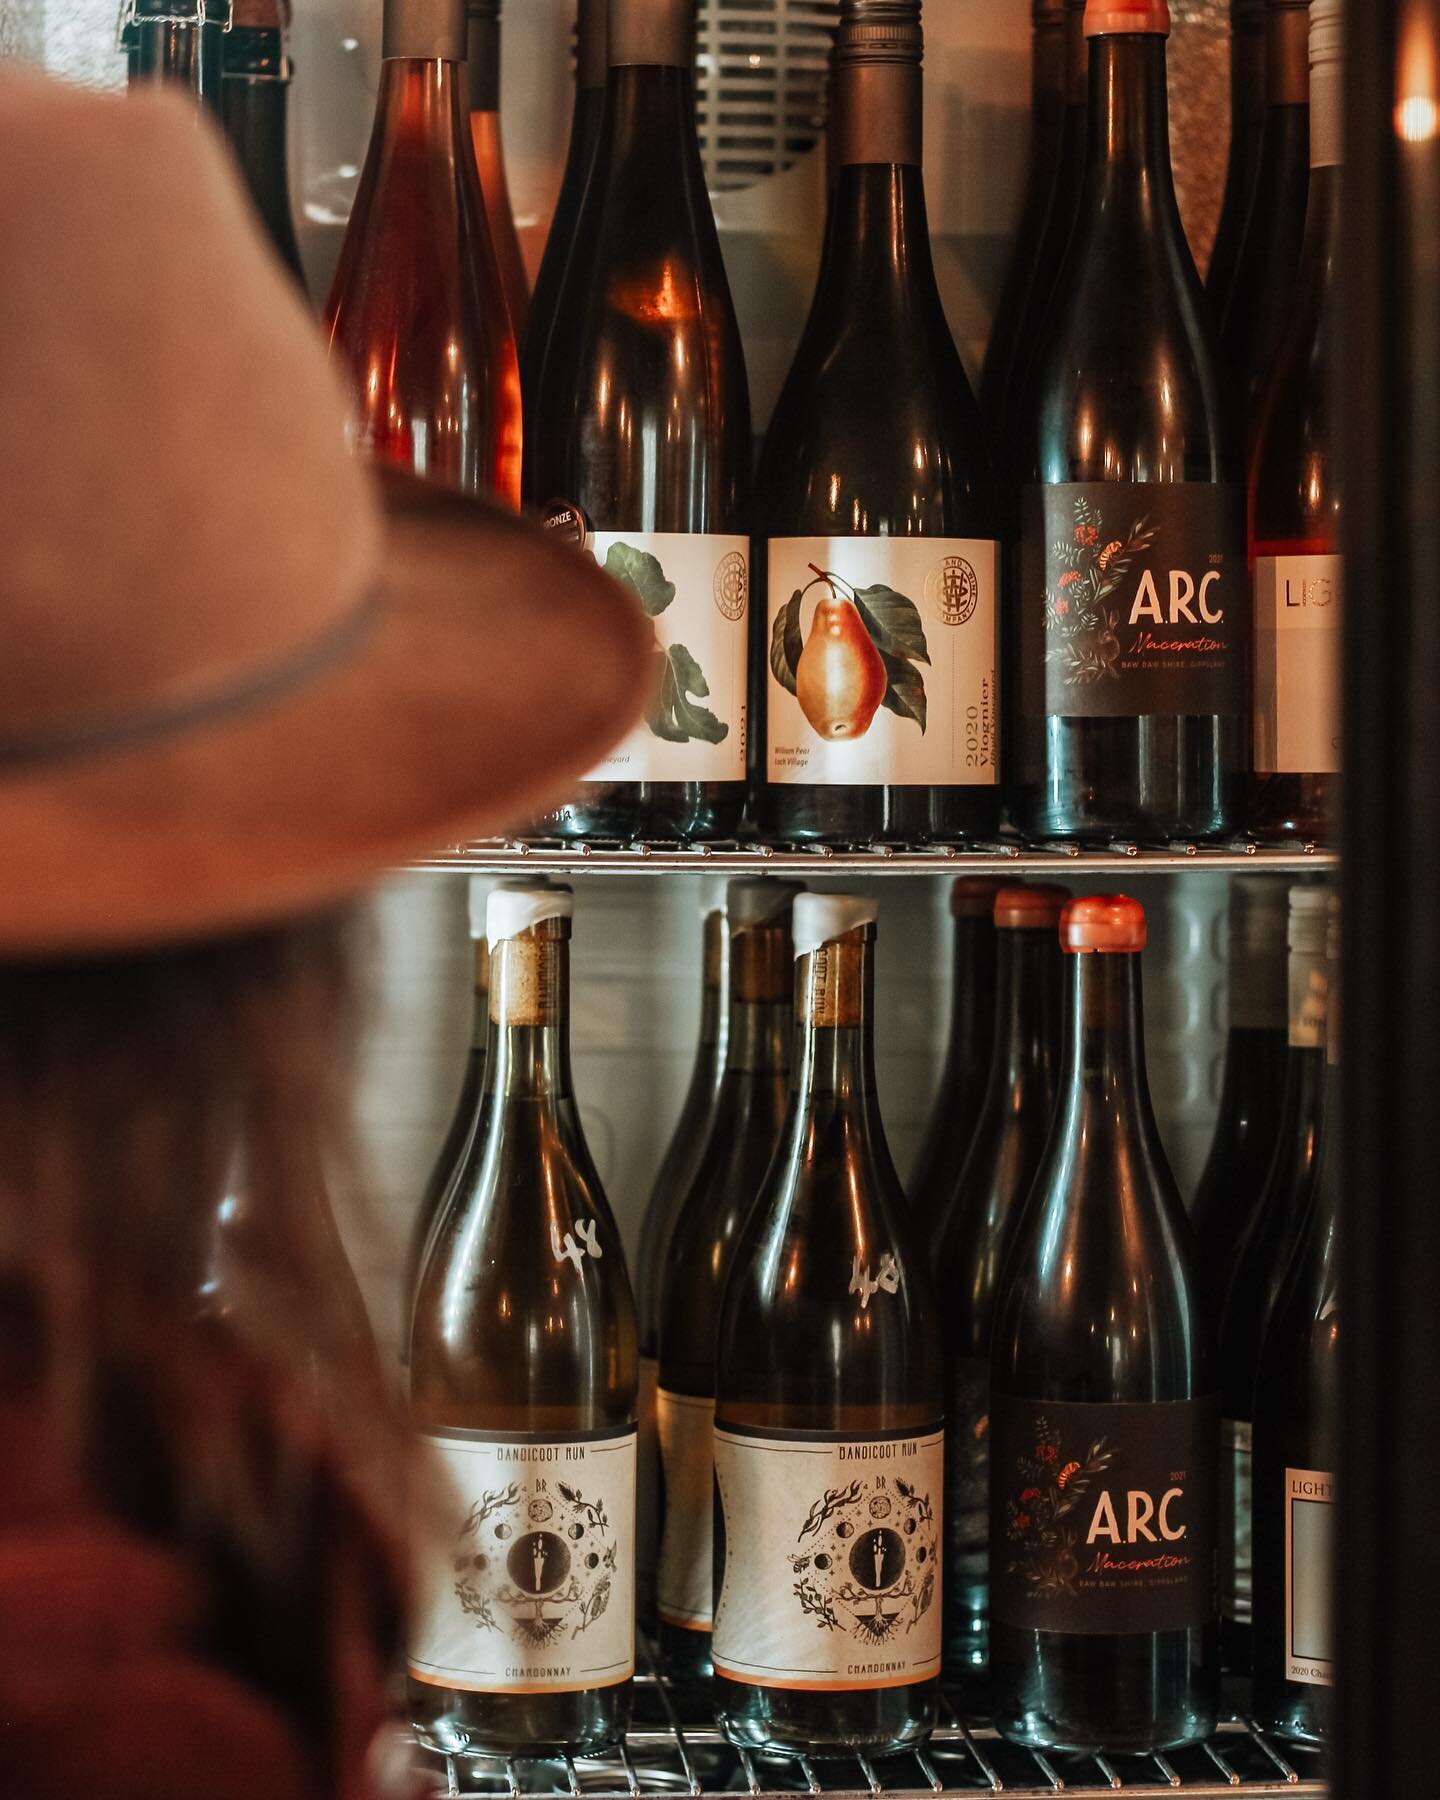 Local wines are our favourite kind. The fridge is fully stocked, so you can be sure to find something to suit your taste this weekend 🍷